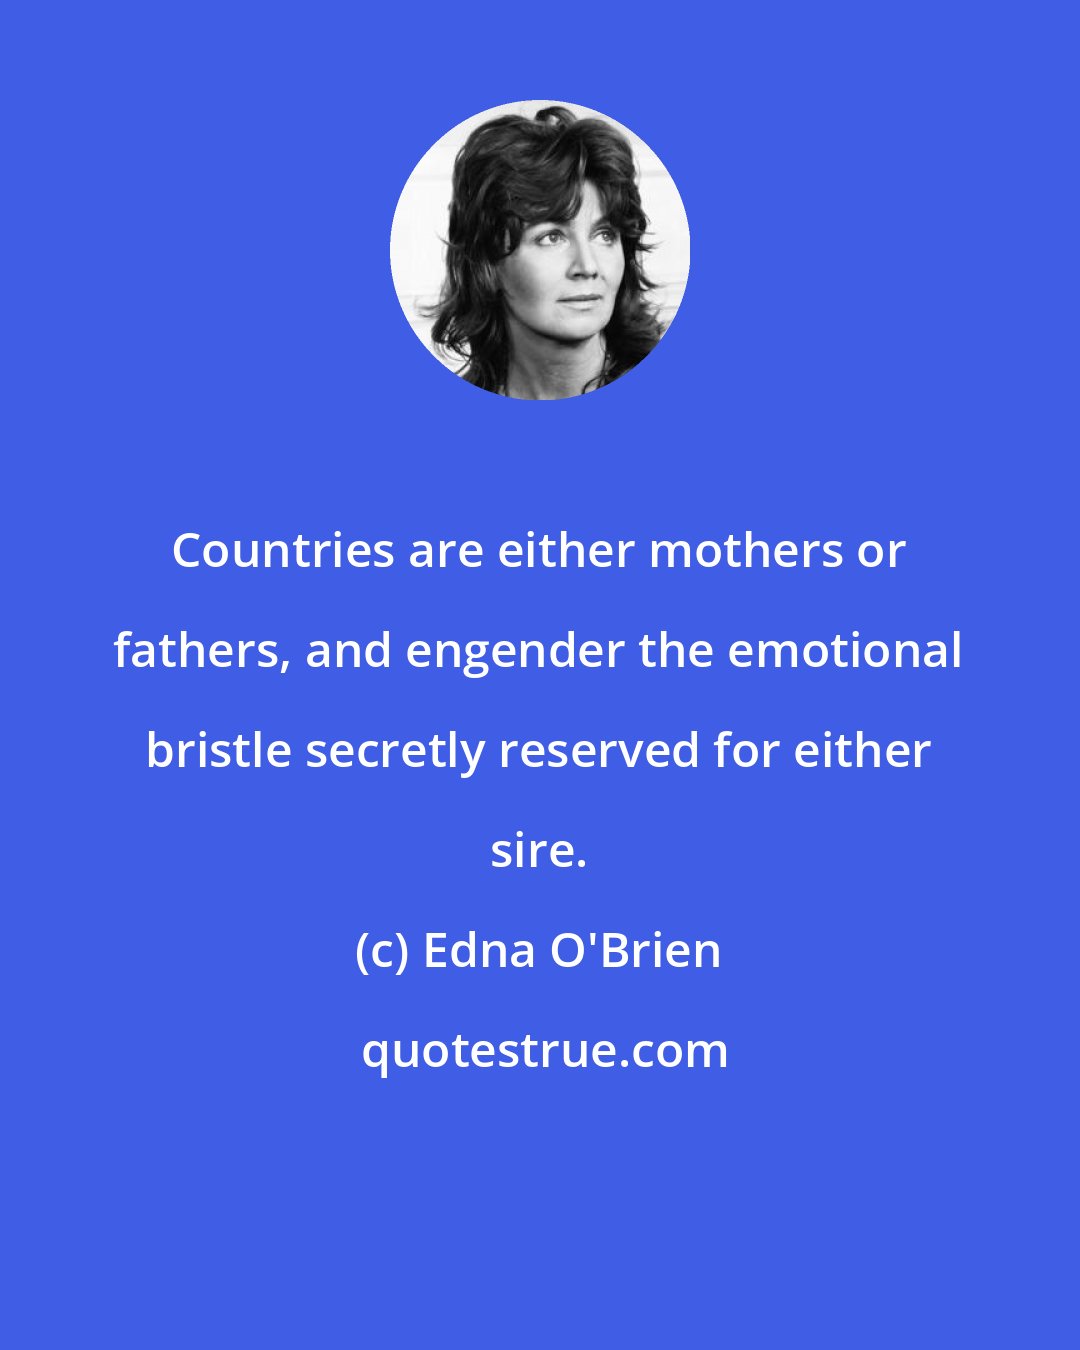 Edna O'Brien: Countries are either mothers or fathers, and engender the emotional bristle secretly reserved for either sire.